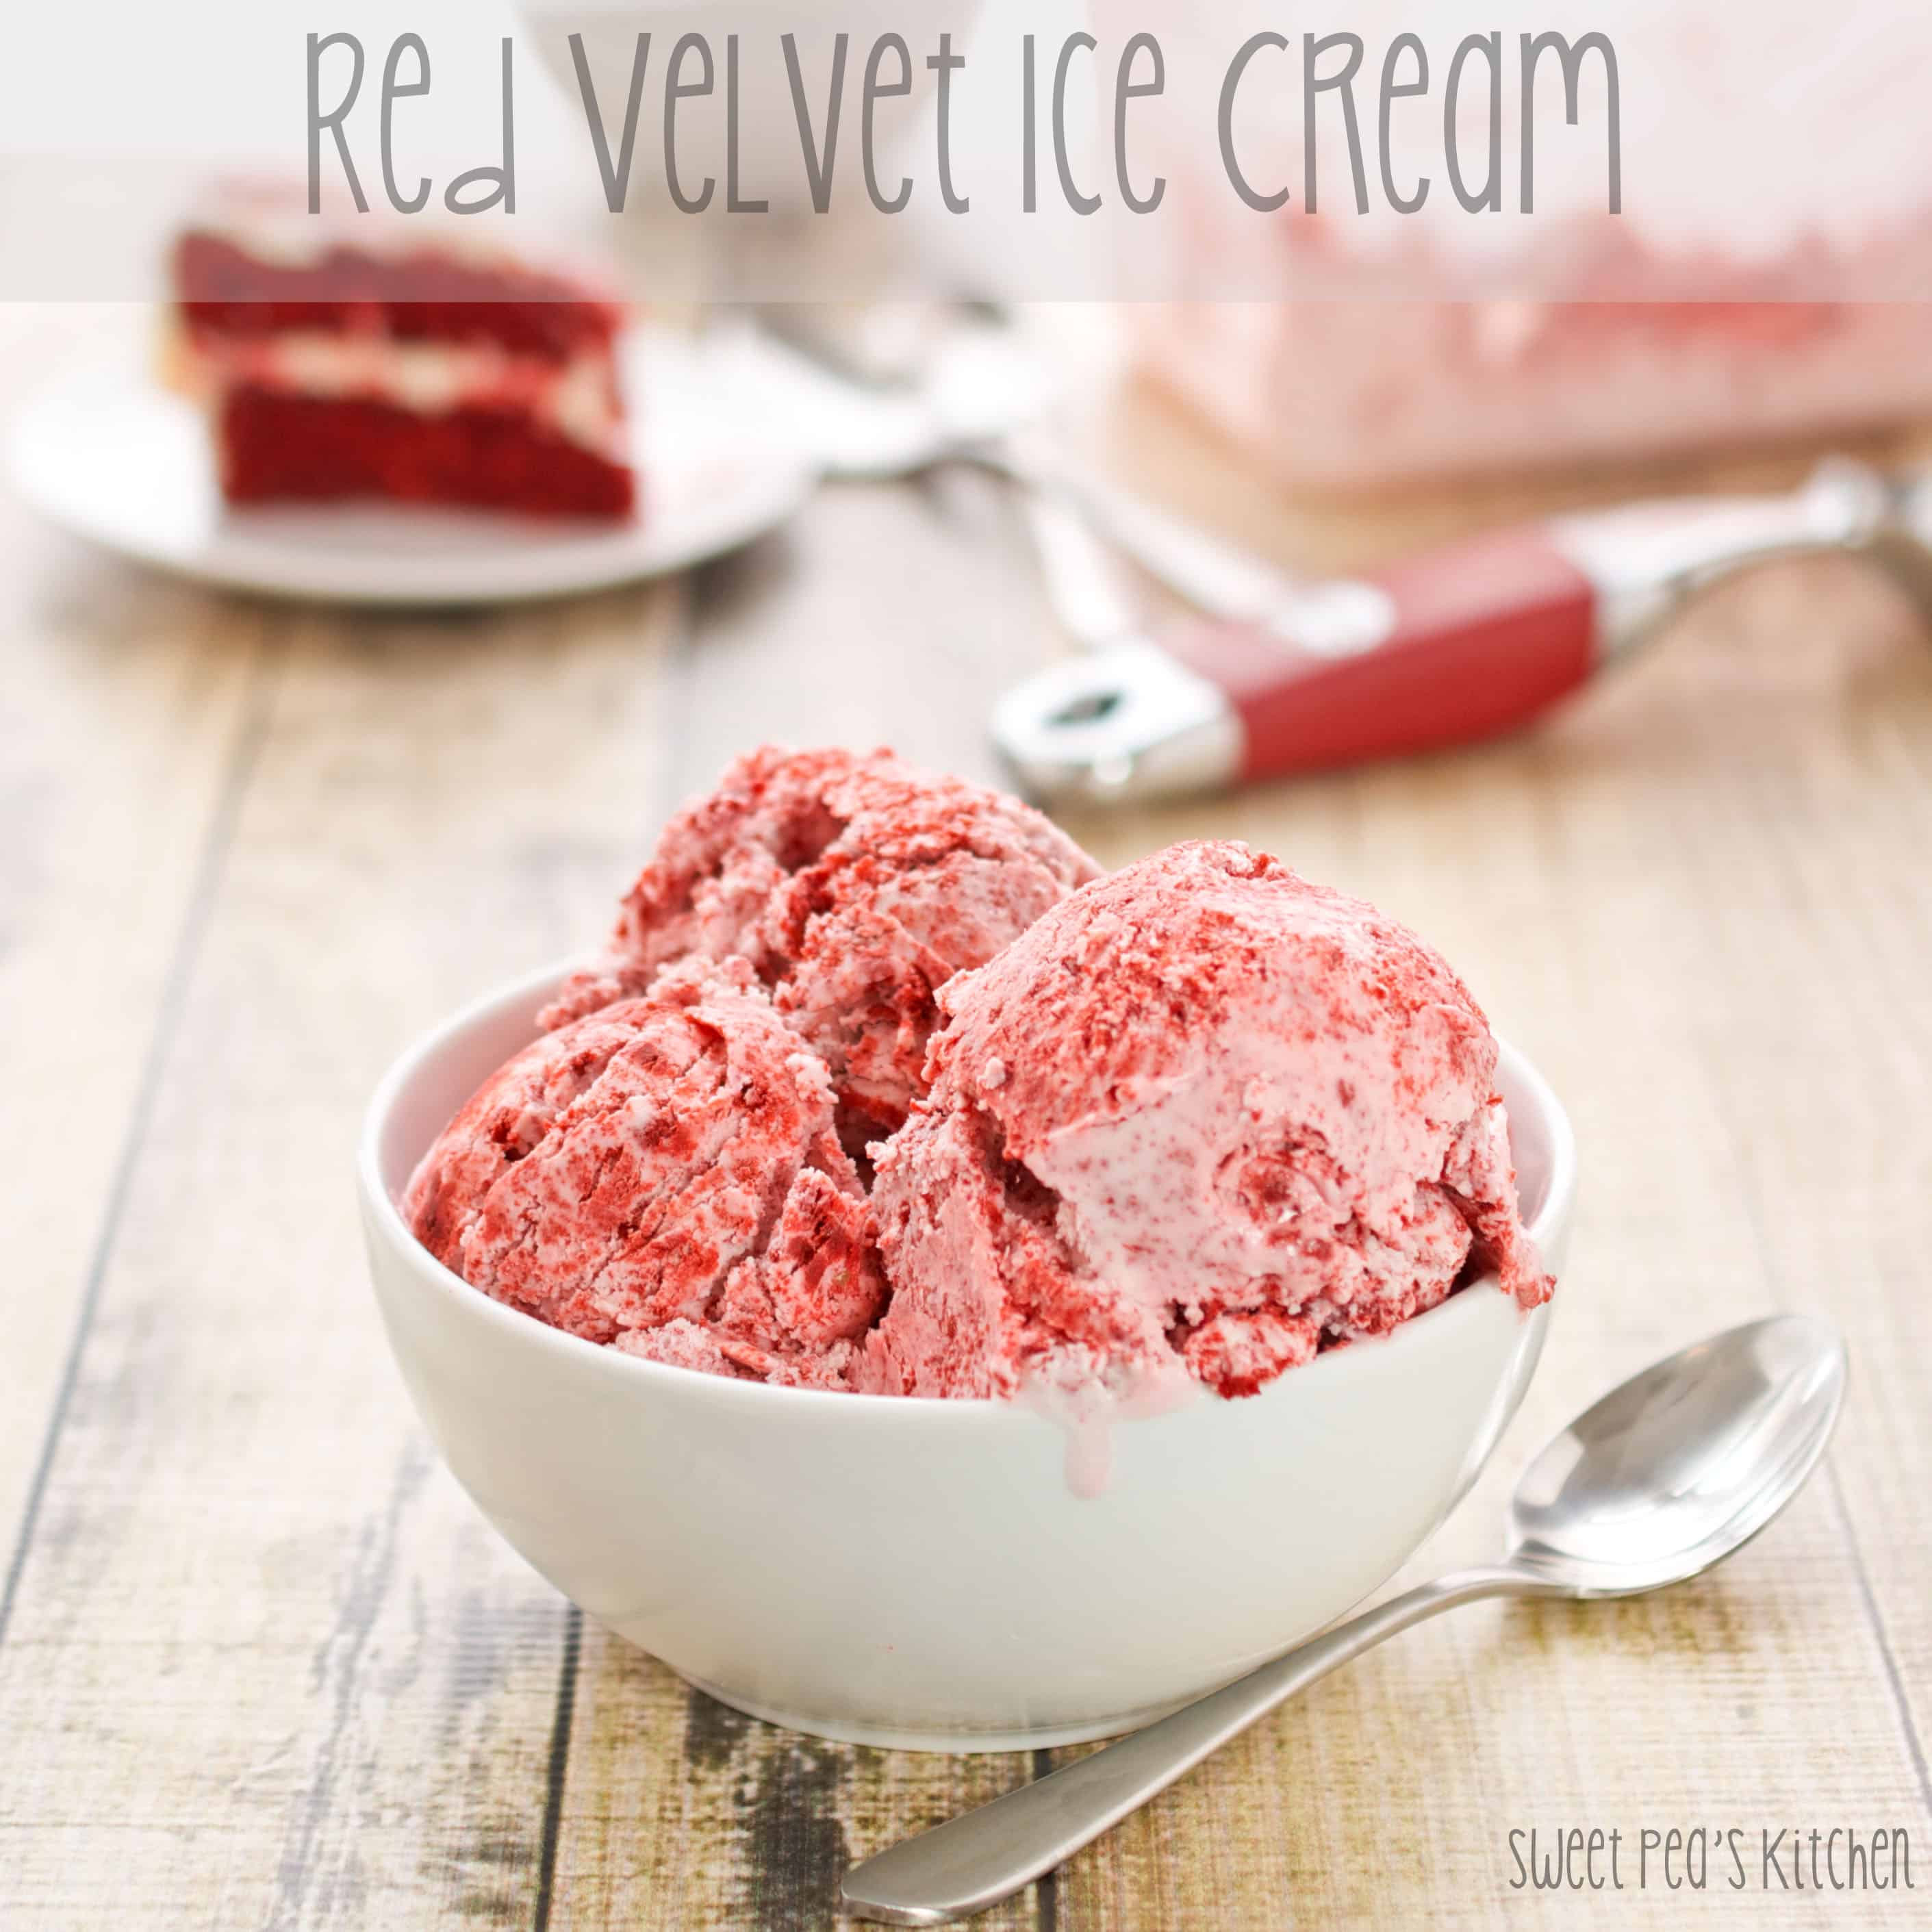 Side picture of red velvet ice cream with utensils in background